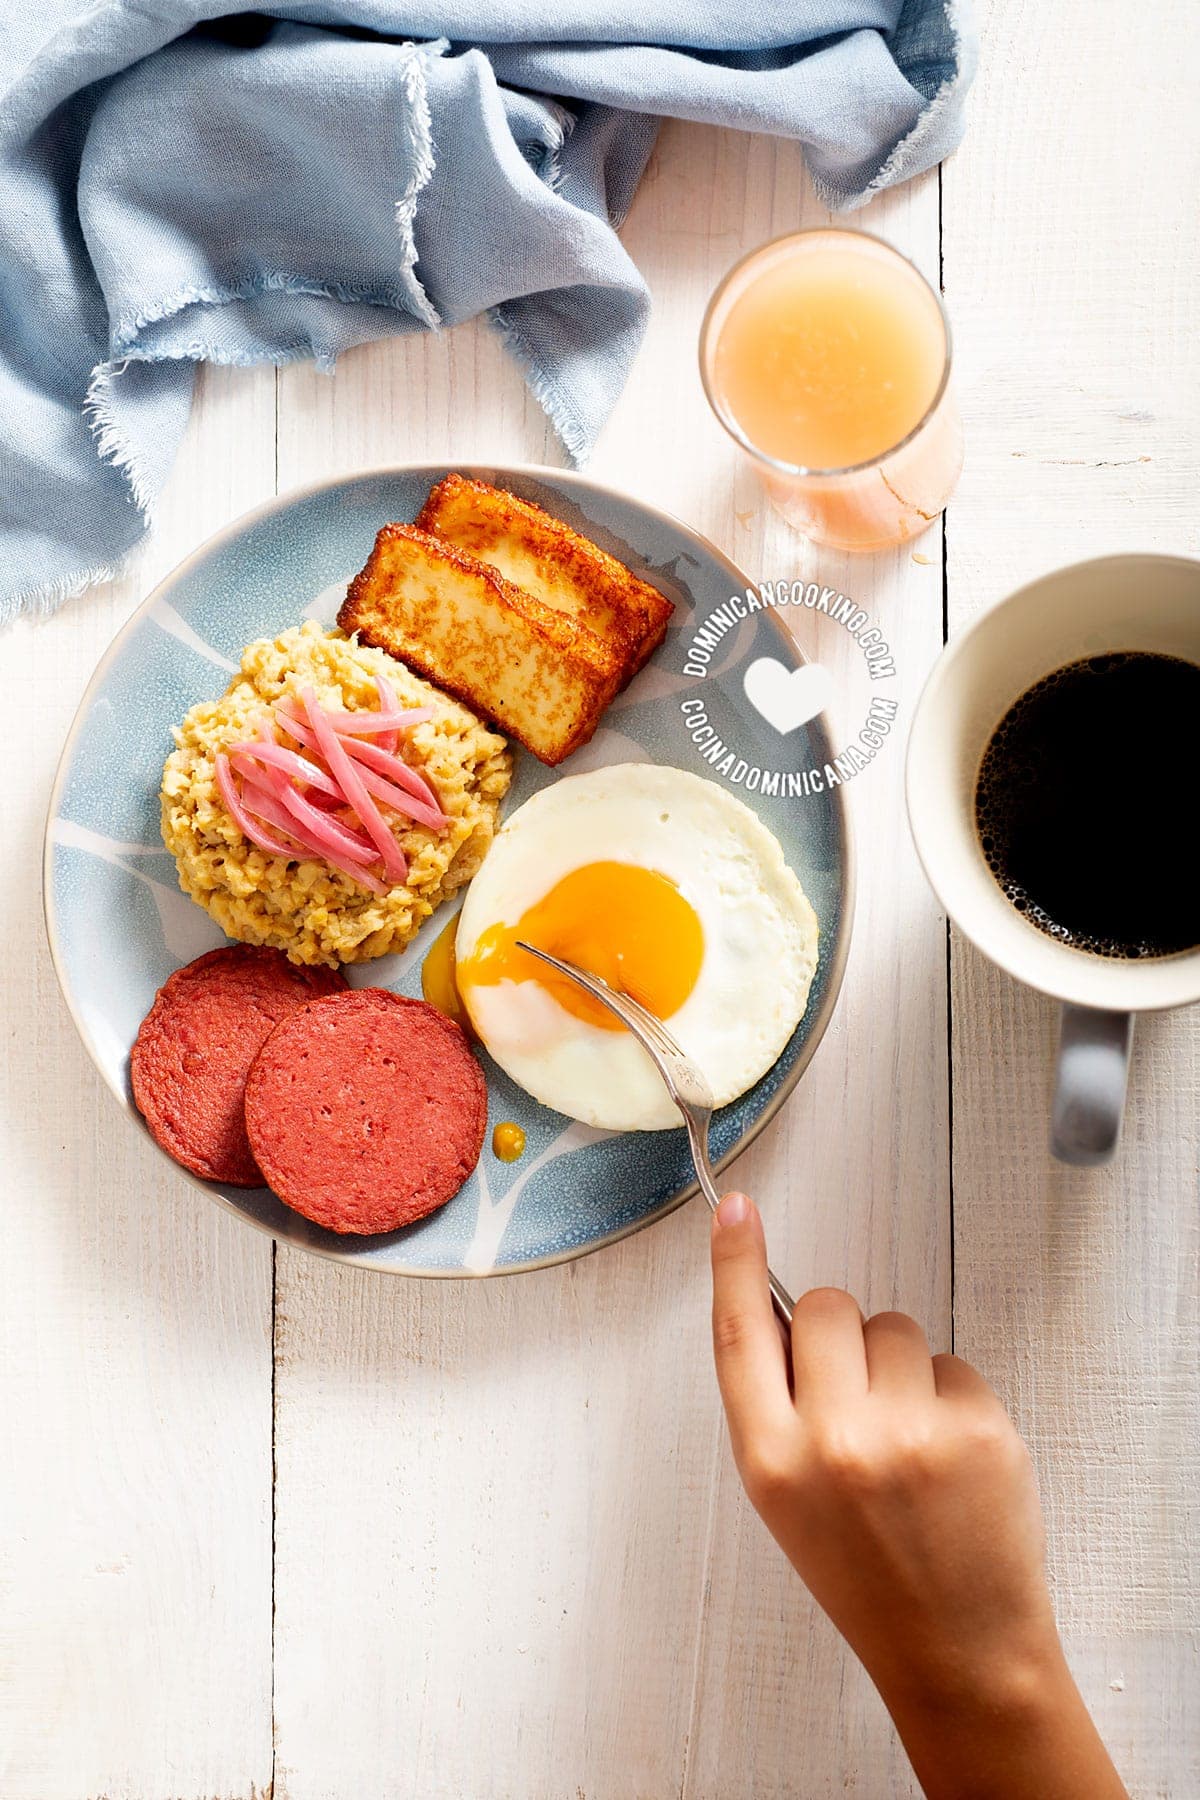 Plate of mangú with cheese, salami, and eggs.